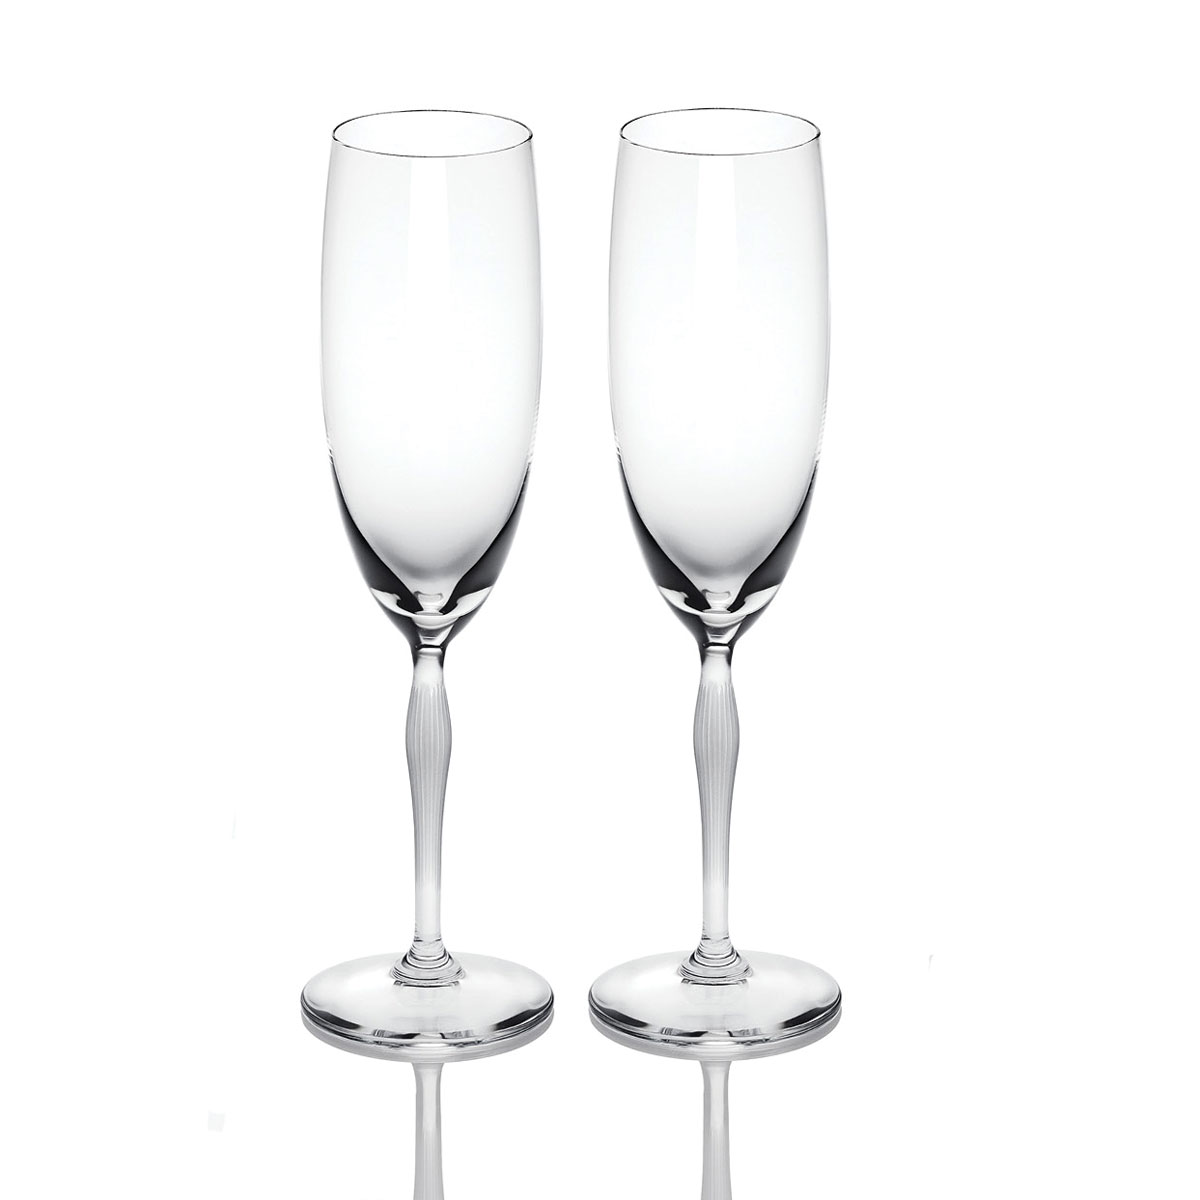 Lalique 100 Points Toasting Crystal Flute Crystal Glasses By James Suckling, Pair